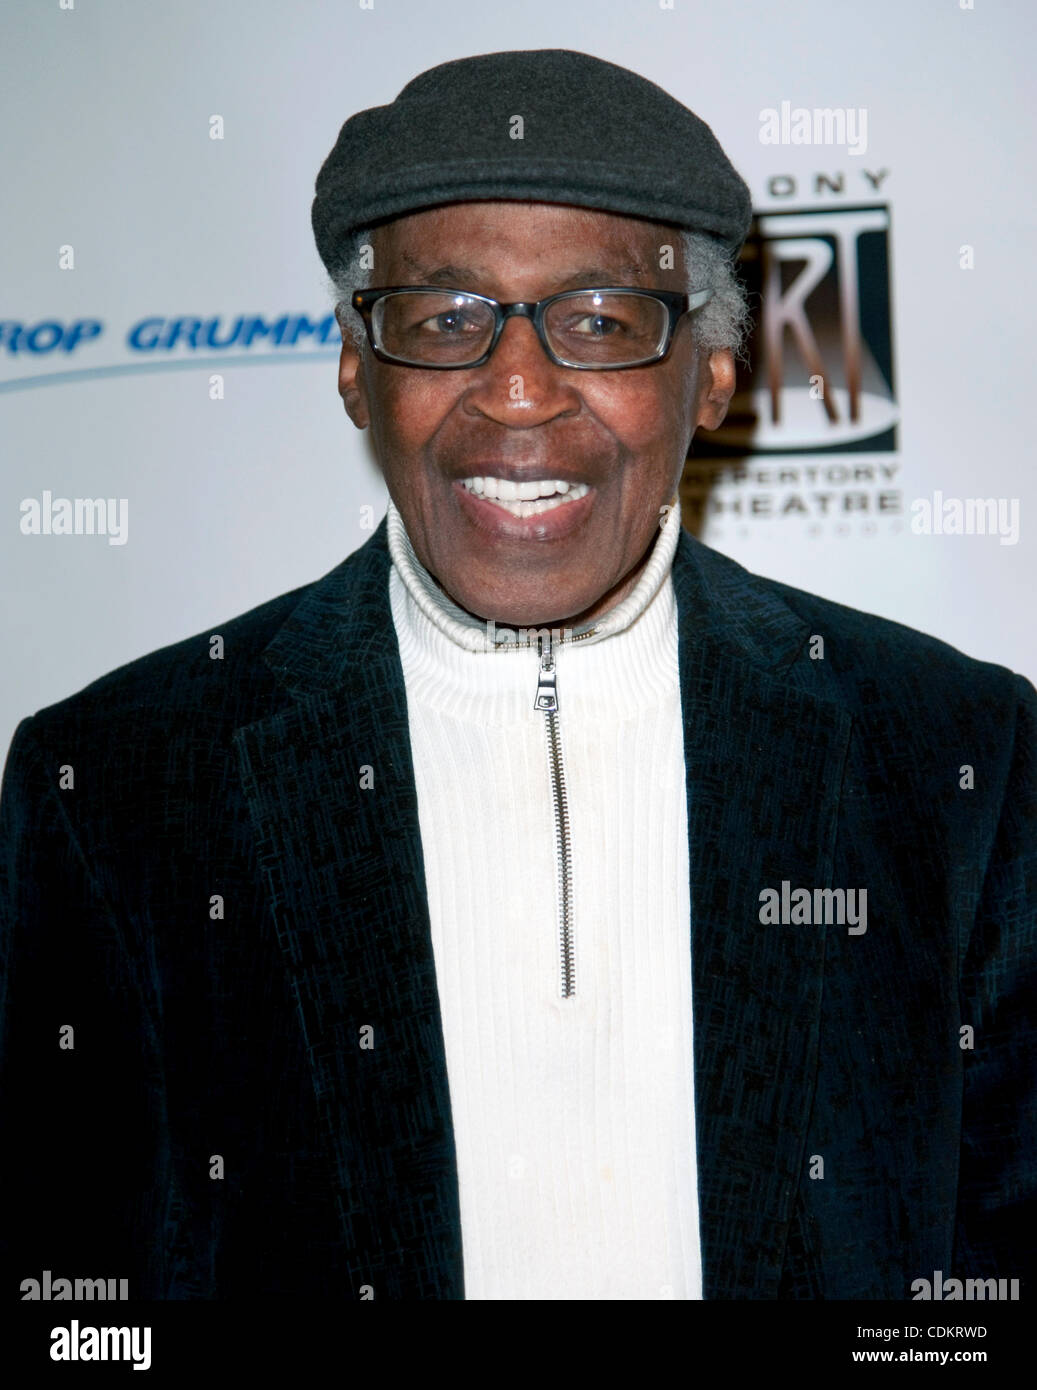 Mar. 25, 2011 - Los Angeles, California, USA -  ROBERT GUILLAUME attends the opening night of the Ebony Repertory Theatre's production of 'A Raisin In The Sun,' directed by Phylicia Rashad. Stock Photo